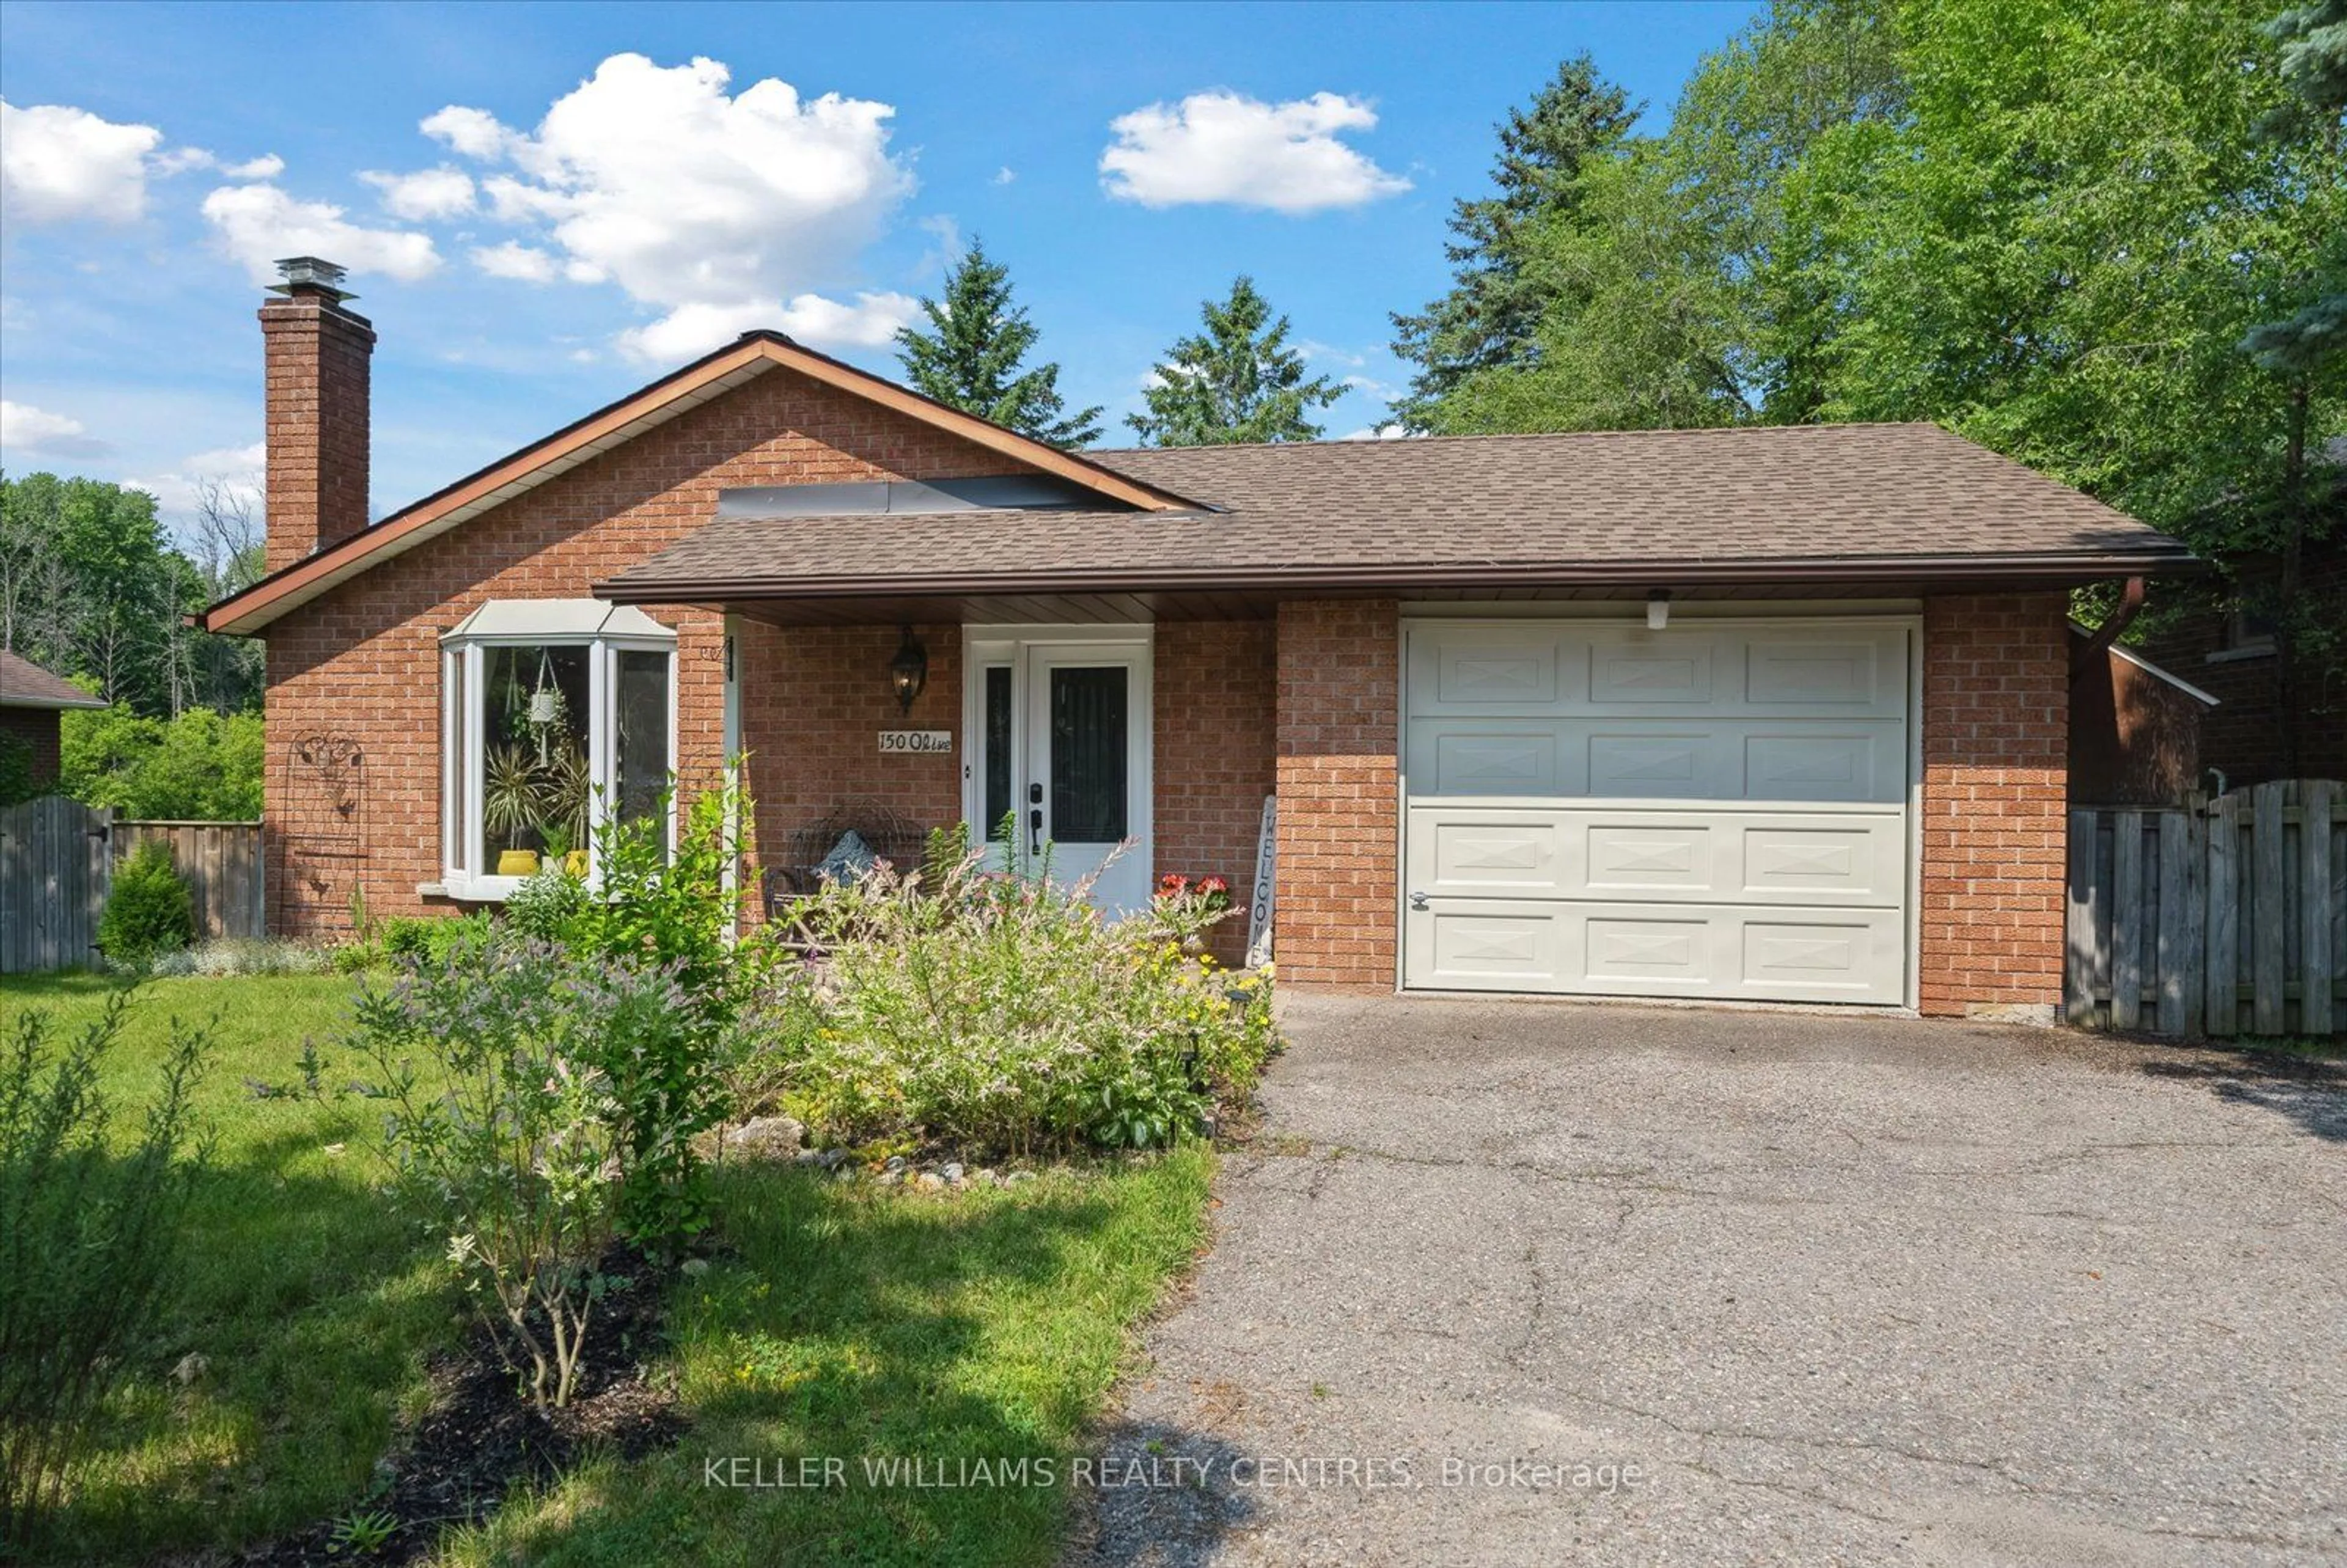 Home with brick exterior material for 150 Olive St, East Gwillimbury Ontario L9N 1M2